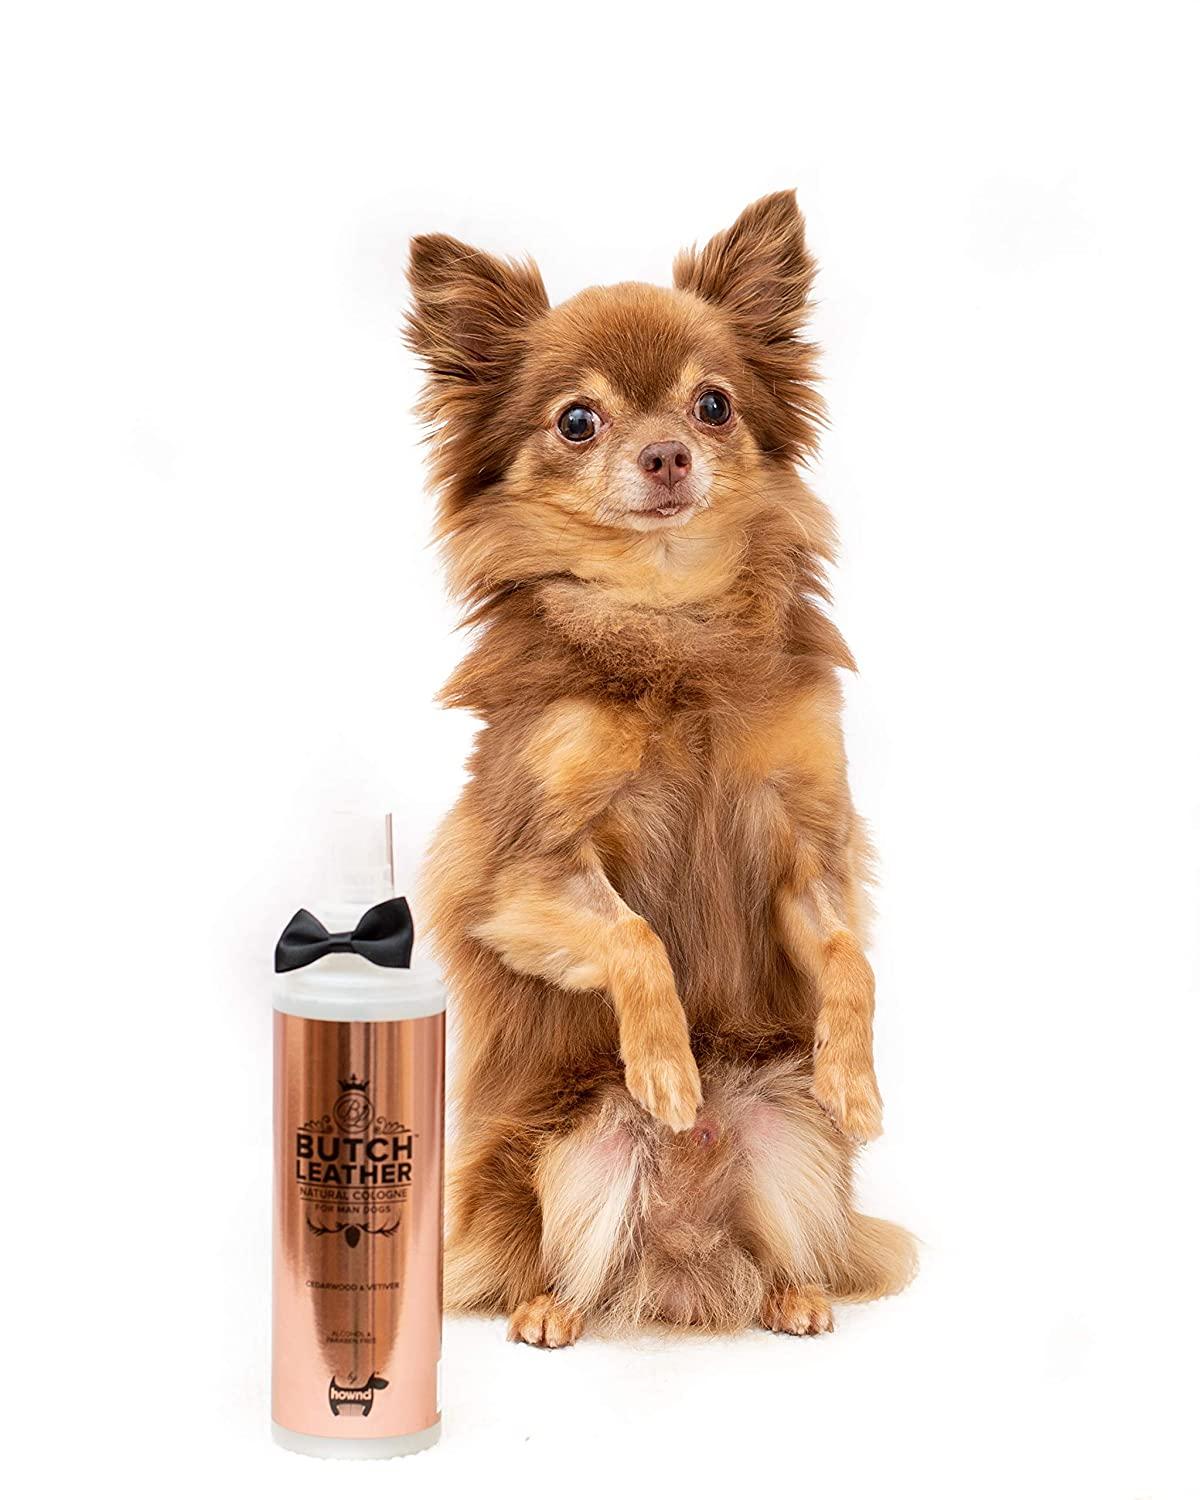 Peach Bum Natural Parfum – The Country Canine Company